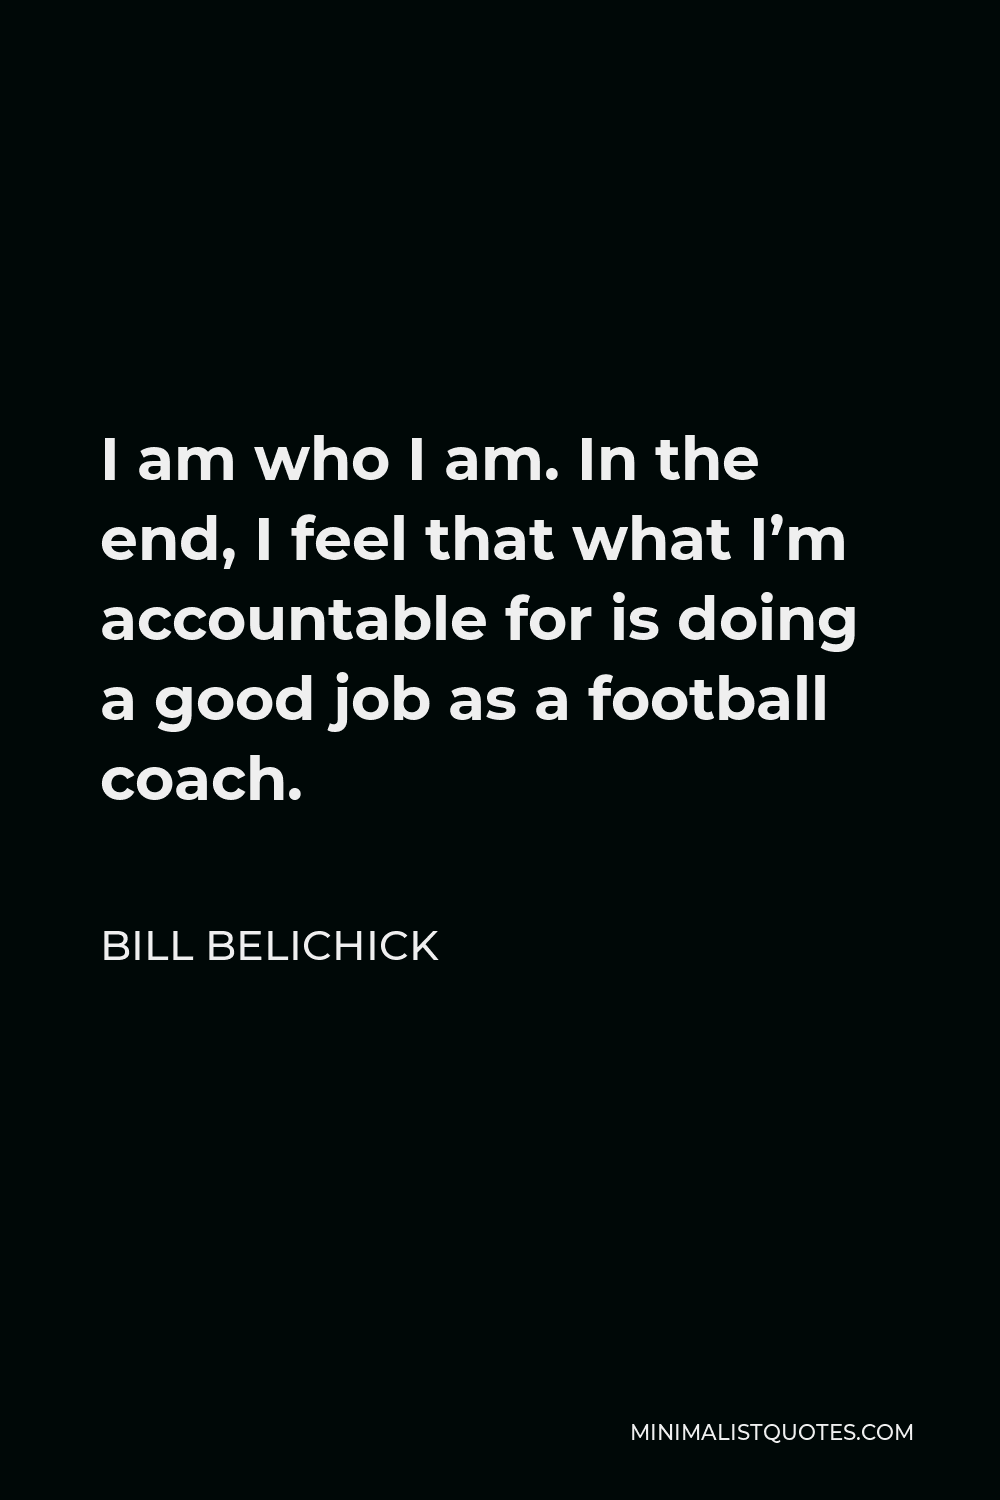 Bill Belichick Quote - I am who I am. In the end, I feel that what I’m accountable for is doing a good job as a football coach.